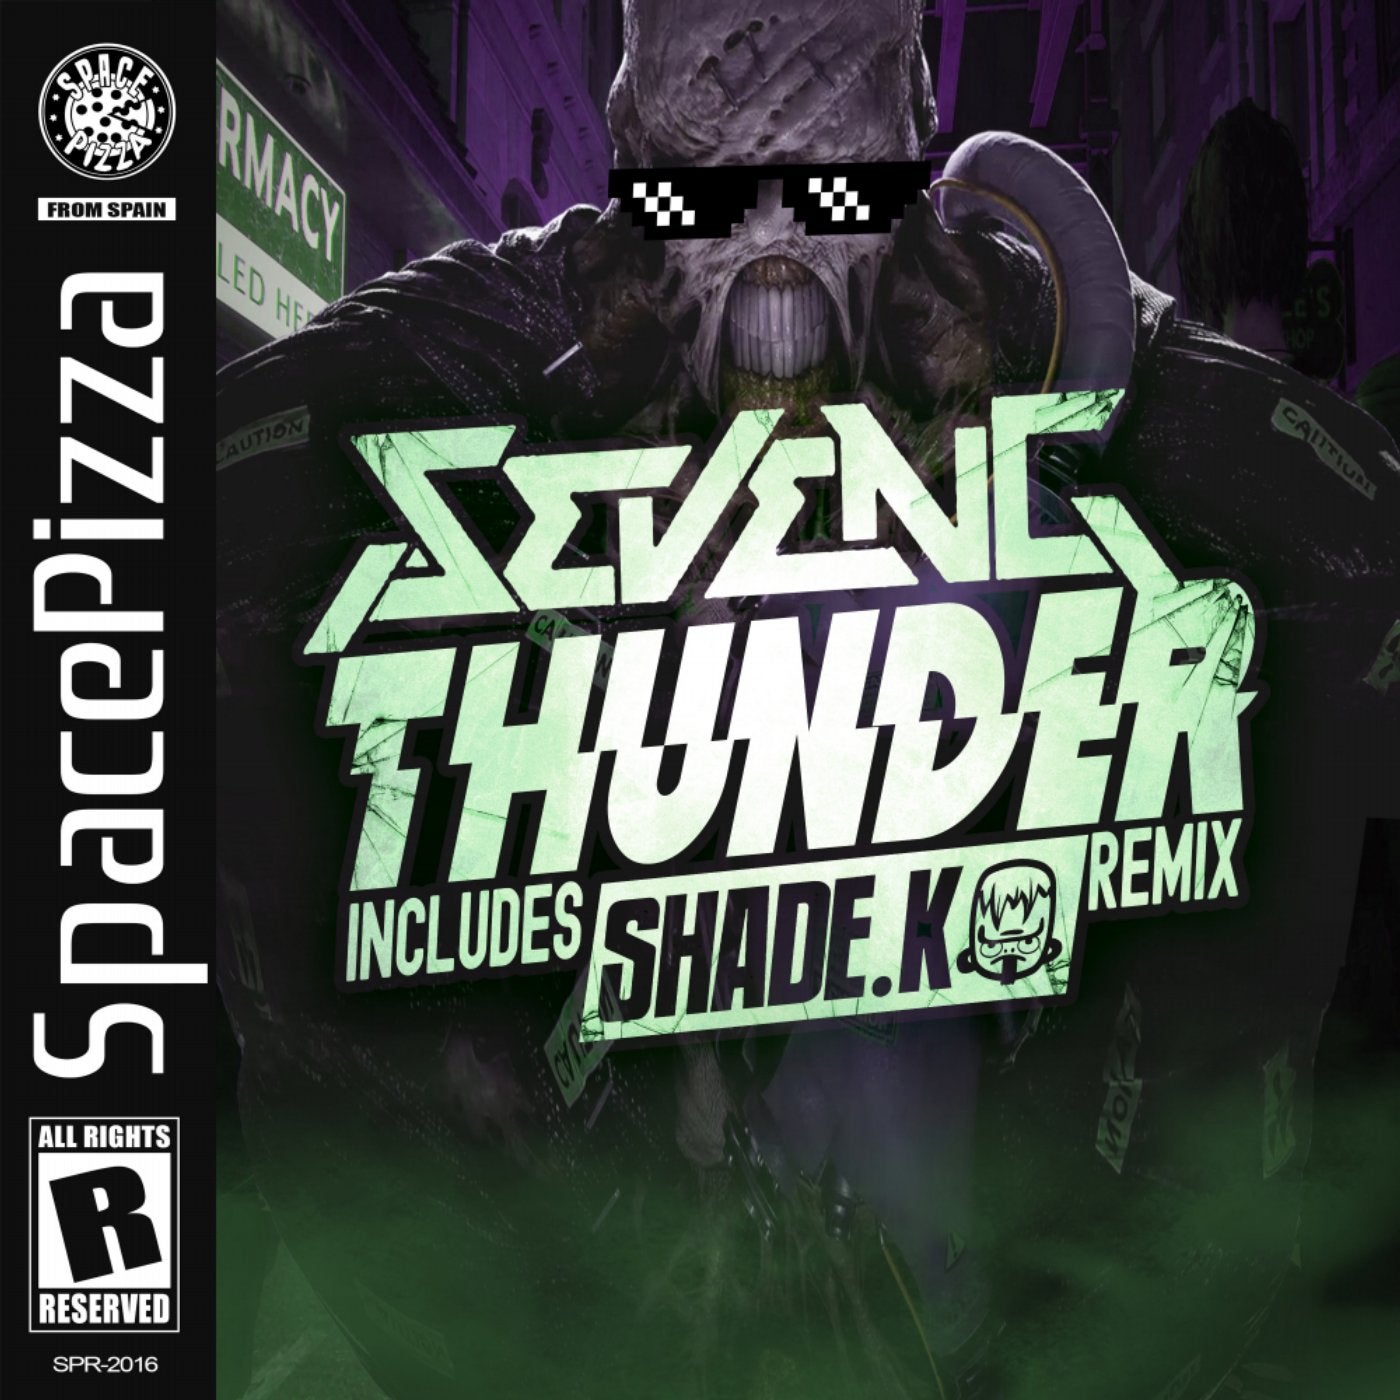 Thunder original. Thunder Original Mix. Thunder в ауте. Thunder Original Mix музыка. Shades of Thunder - still going strong.